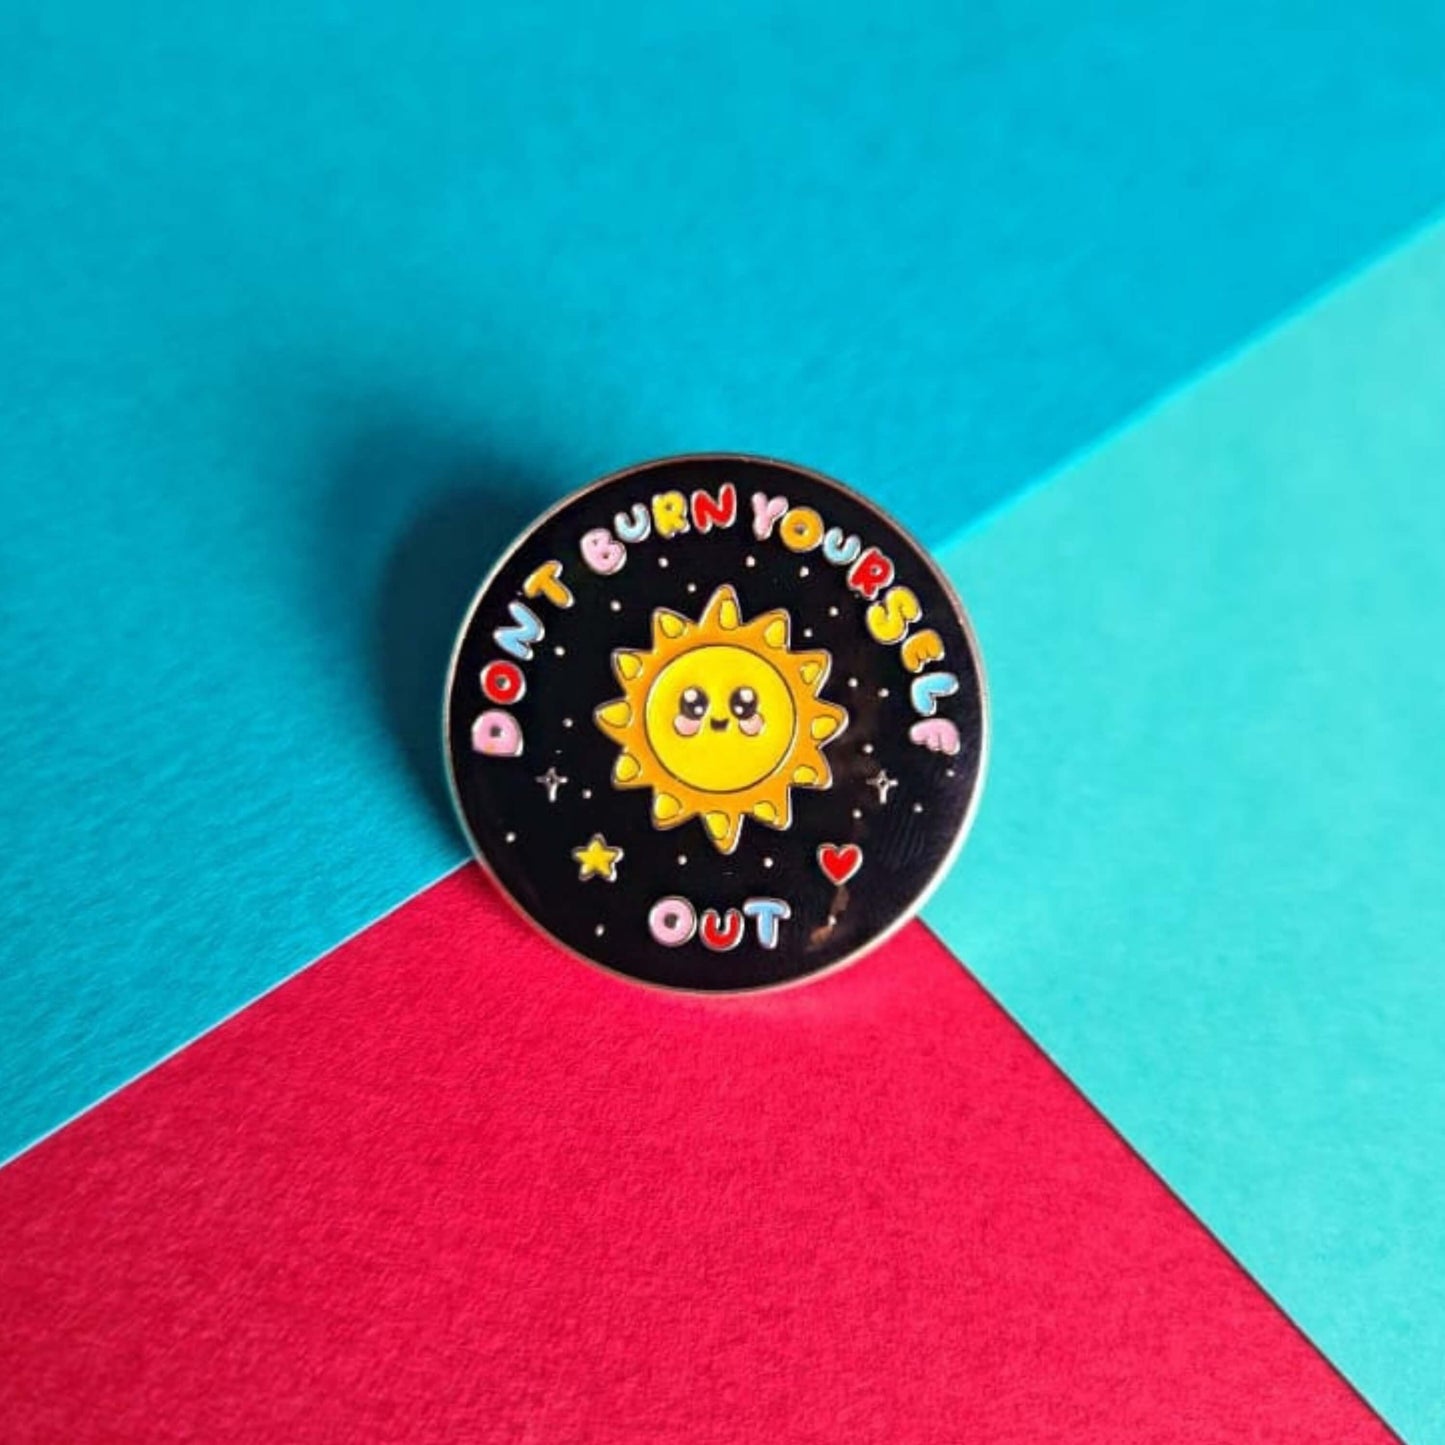 The Don't Burn Yourself Out Sunshine Enamel Pin on a red and blue background. The circle shaped pin badge is a black base with a yellow smiling sunshine in the centre with rainbow text surrounding it reading 'don't burn yourself out' along with a red heart, yellow star and silver sparkles. The design was created as a gentle reminder to practise self care.